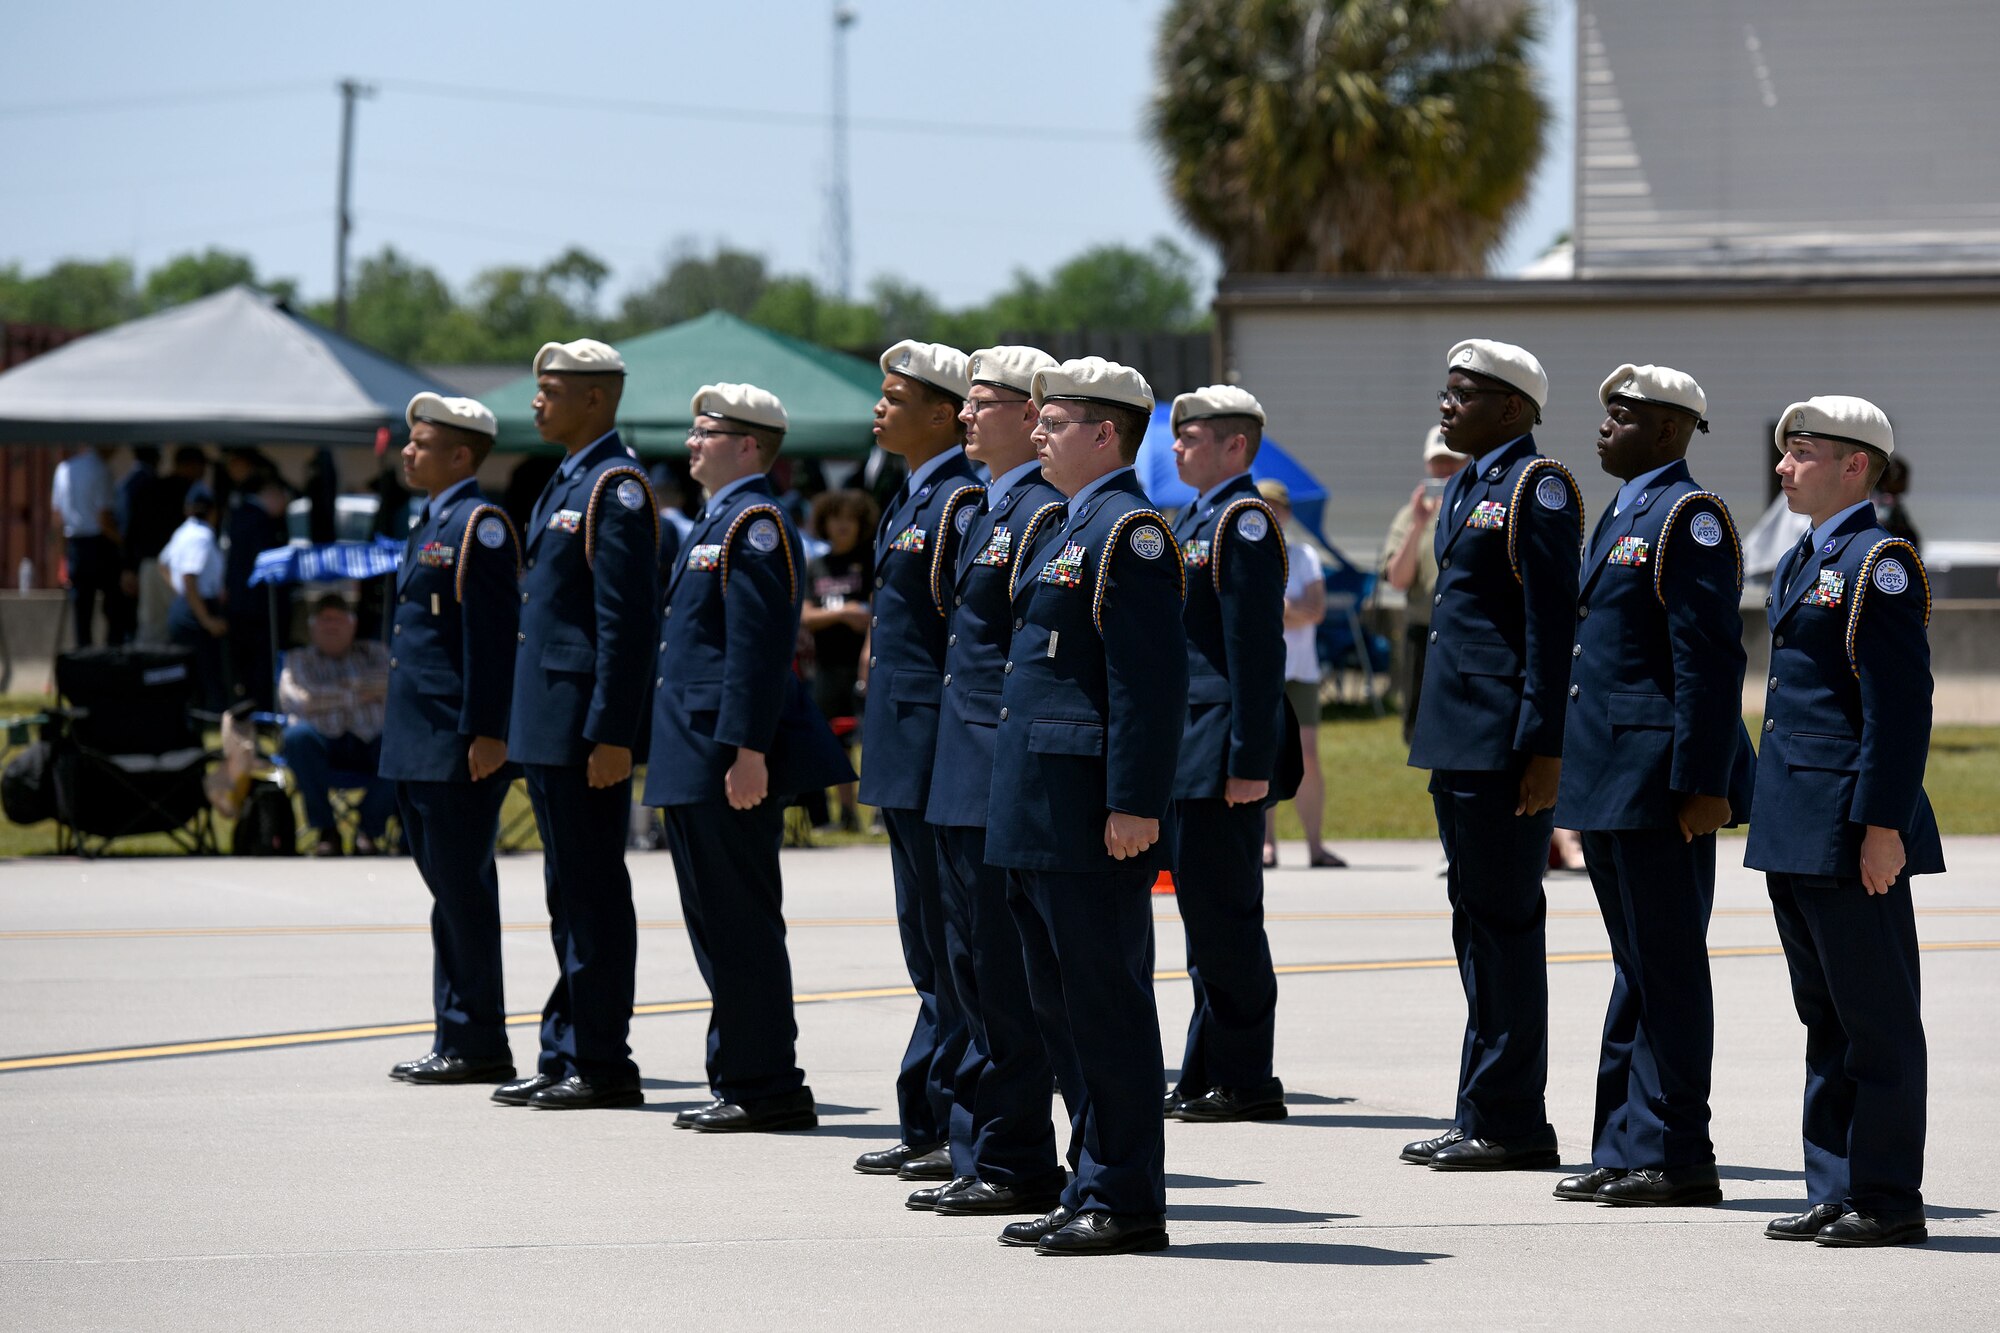 Sumter High School junior ROTC cadets practice their Fancy Platoon Unarmed drill and ceremony event during the annual Top Gun Drill Meet at McEntire Joint National Guard Base, S.C., April 28, 2018. High School junior ROTC cadets from across the state competed in drill and ceremony events sponsored by the South Carolina Air National Guard.